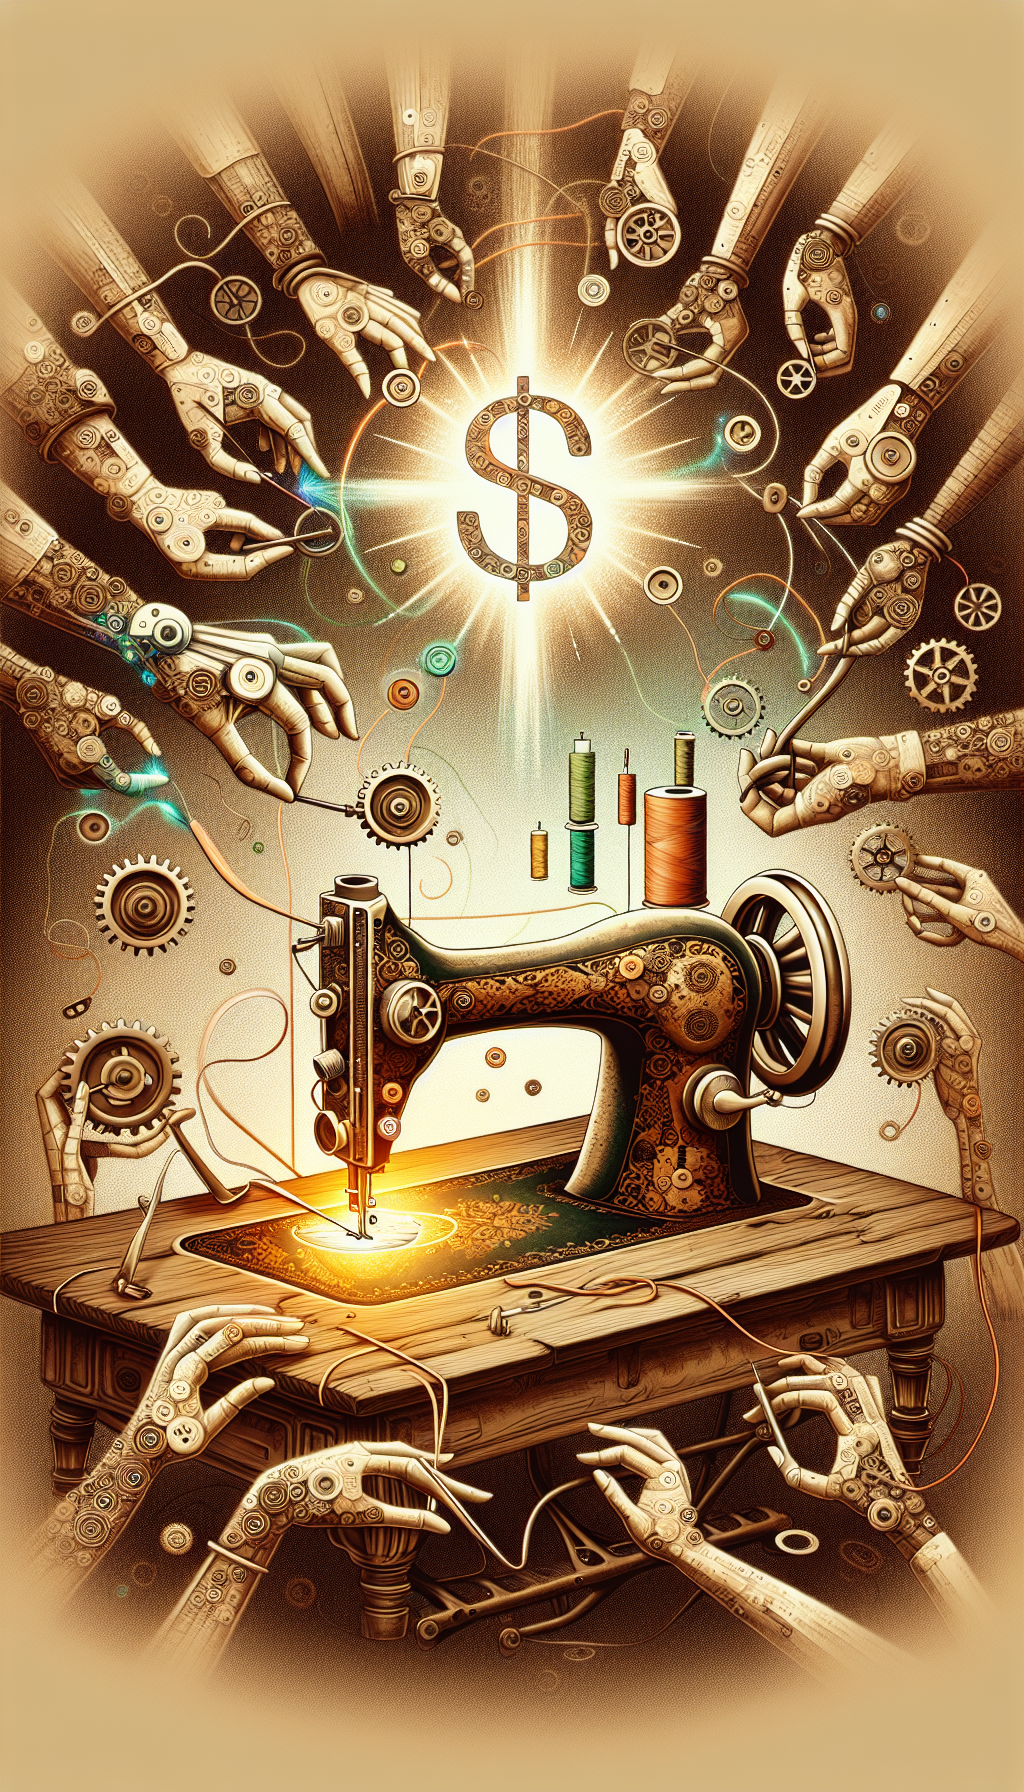 An illustration showcasing an antique sewing machine being transformed by whimsical mechanical hands performing restorative tasks: polishing a rusty wheel, threading a needle with a vibrant thread, and replacing a worn belt. Above, a translucent dollar sign glows, reflecting enhanced value. The image seamlessly blends vintage sepia tones with bursts of color over areas rejuvenated, symbolizing the fusion of preservation and added value.